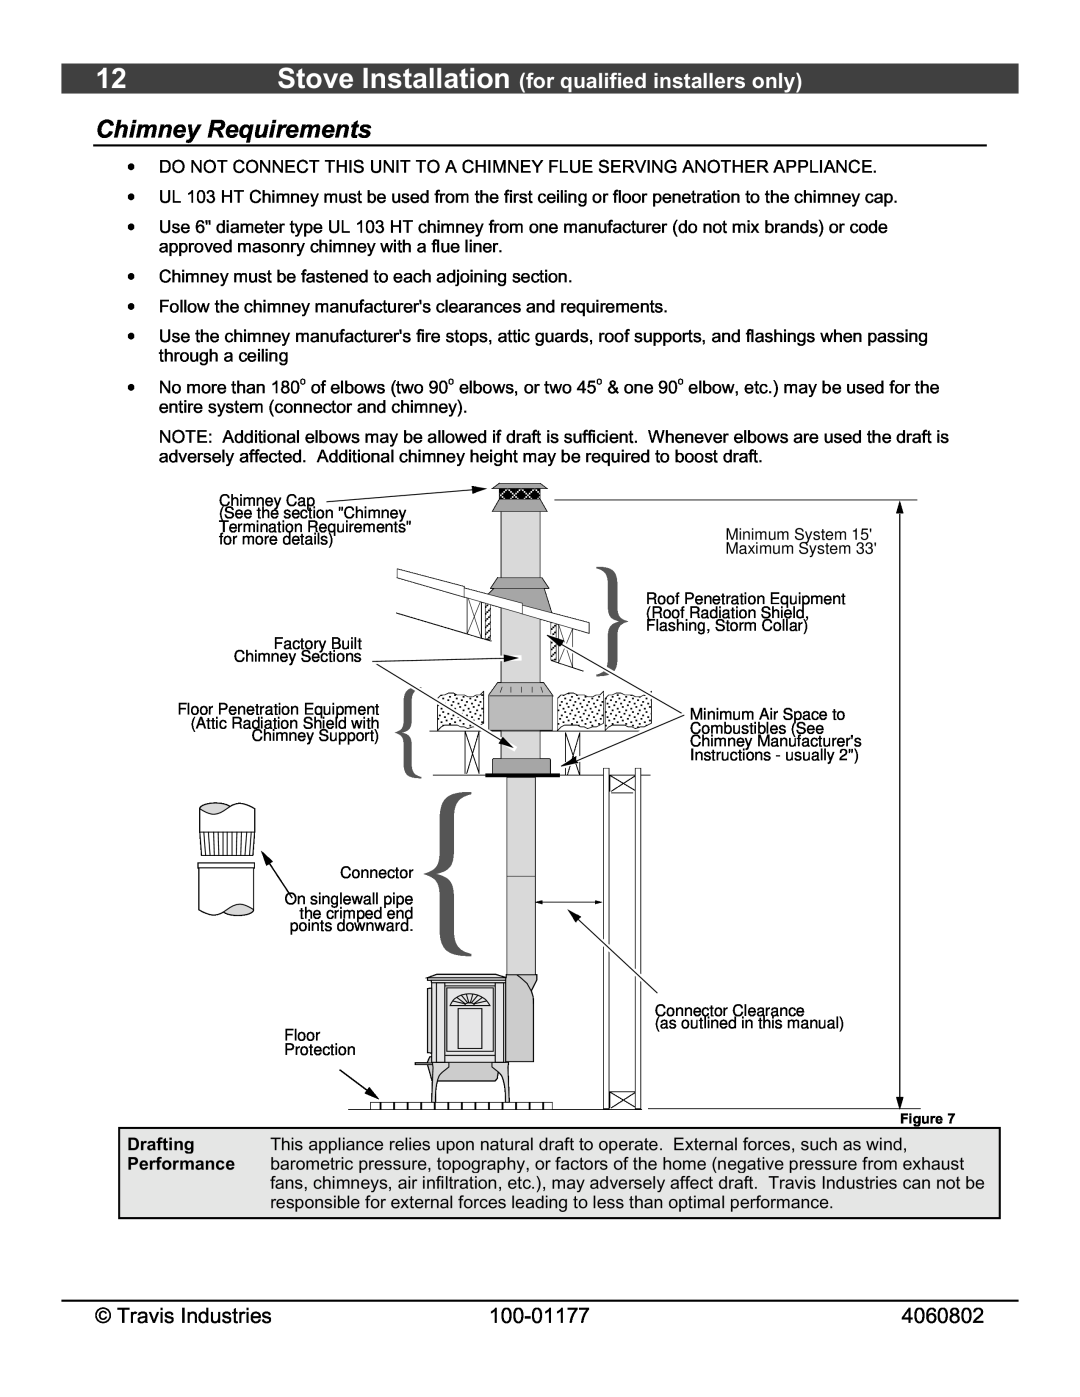 Lopi 028-S-75-2 owner manual Chimney Requirements, Stove Installation for qualified installers only, Drafting, Performance 